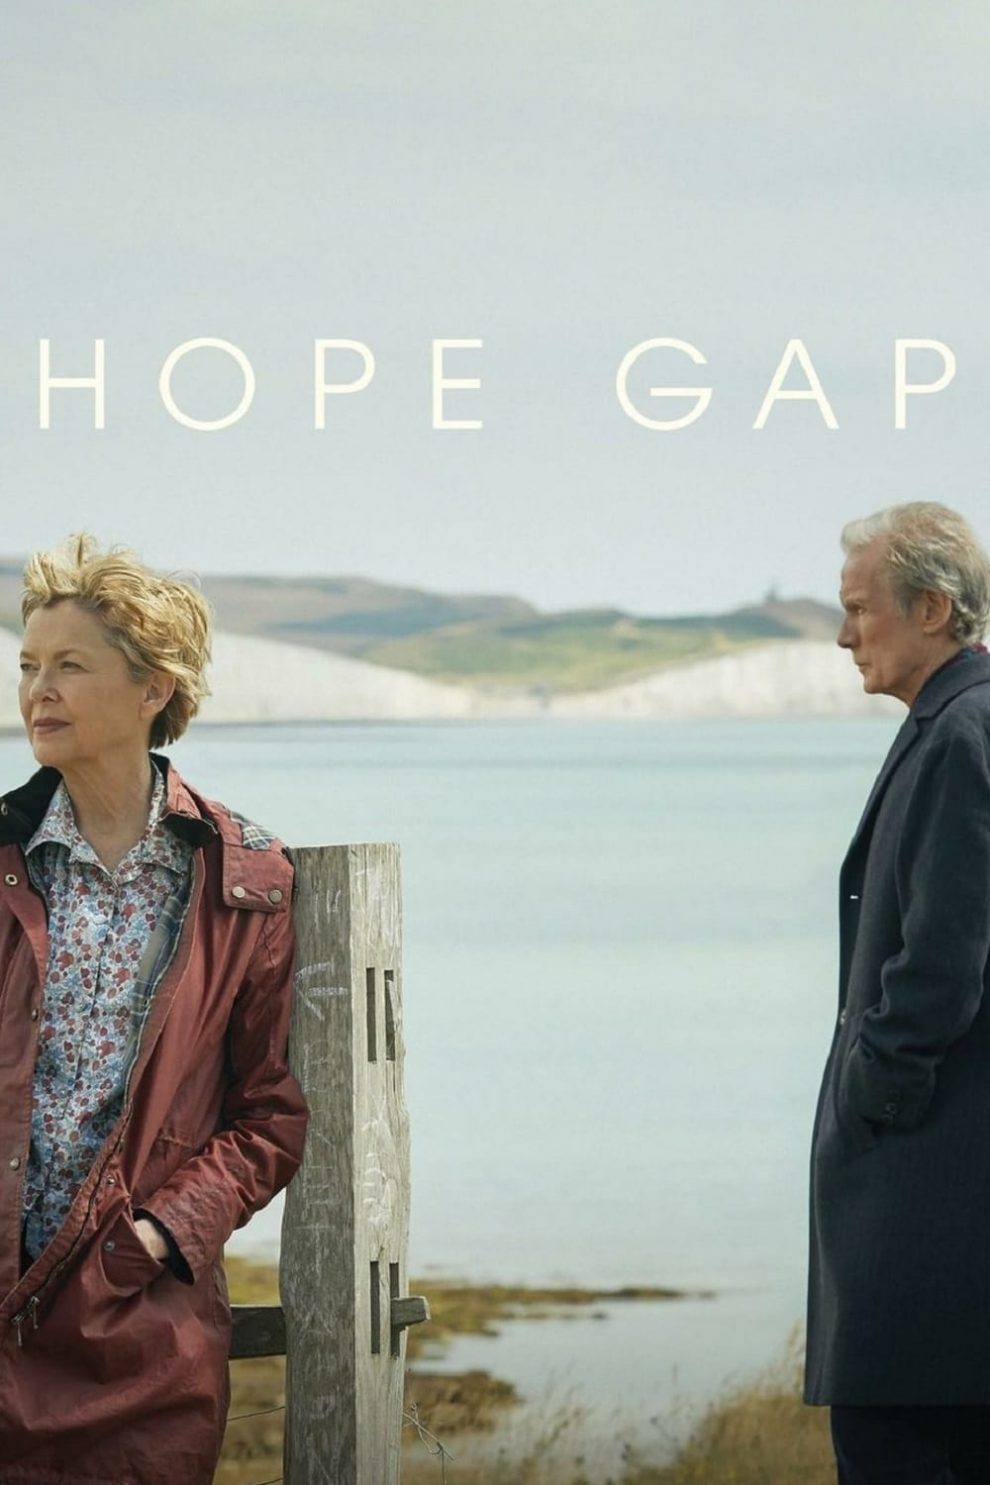 Poster for the movie "Hope Gap"